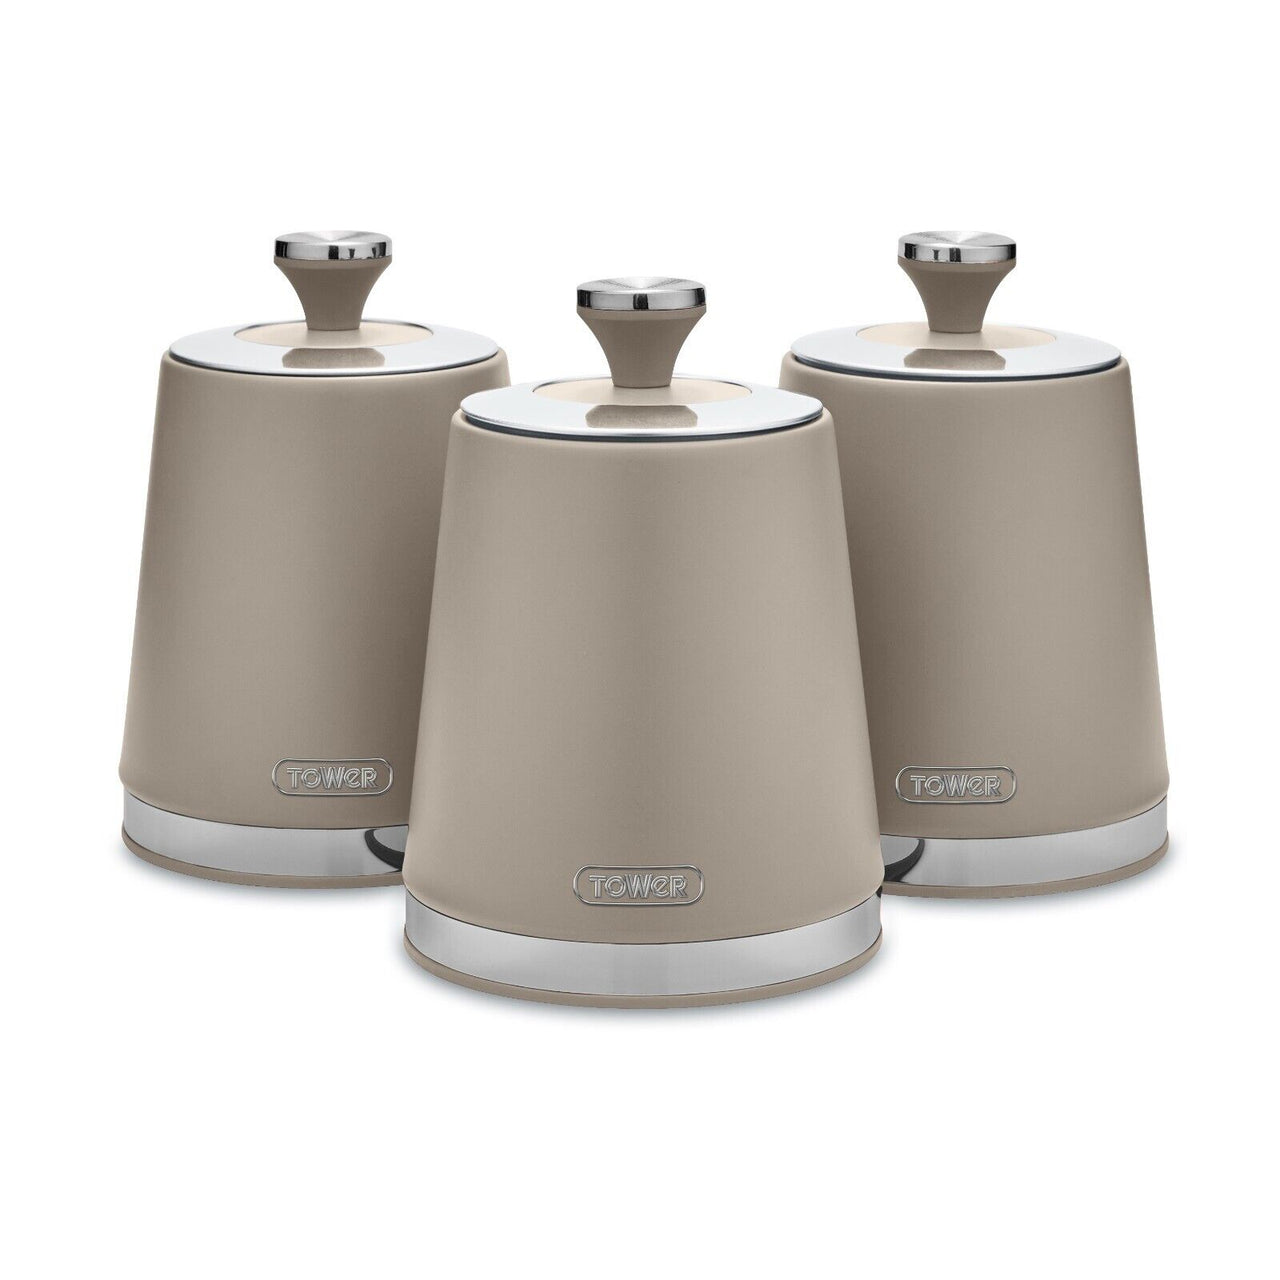 Tower Cavaletto Tea, Coffee & Sugar Storage Canisters in Latte & Chrome Accents